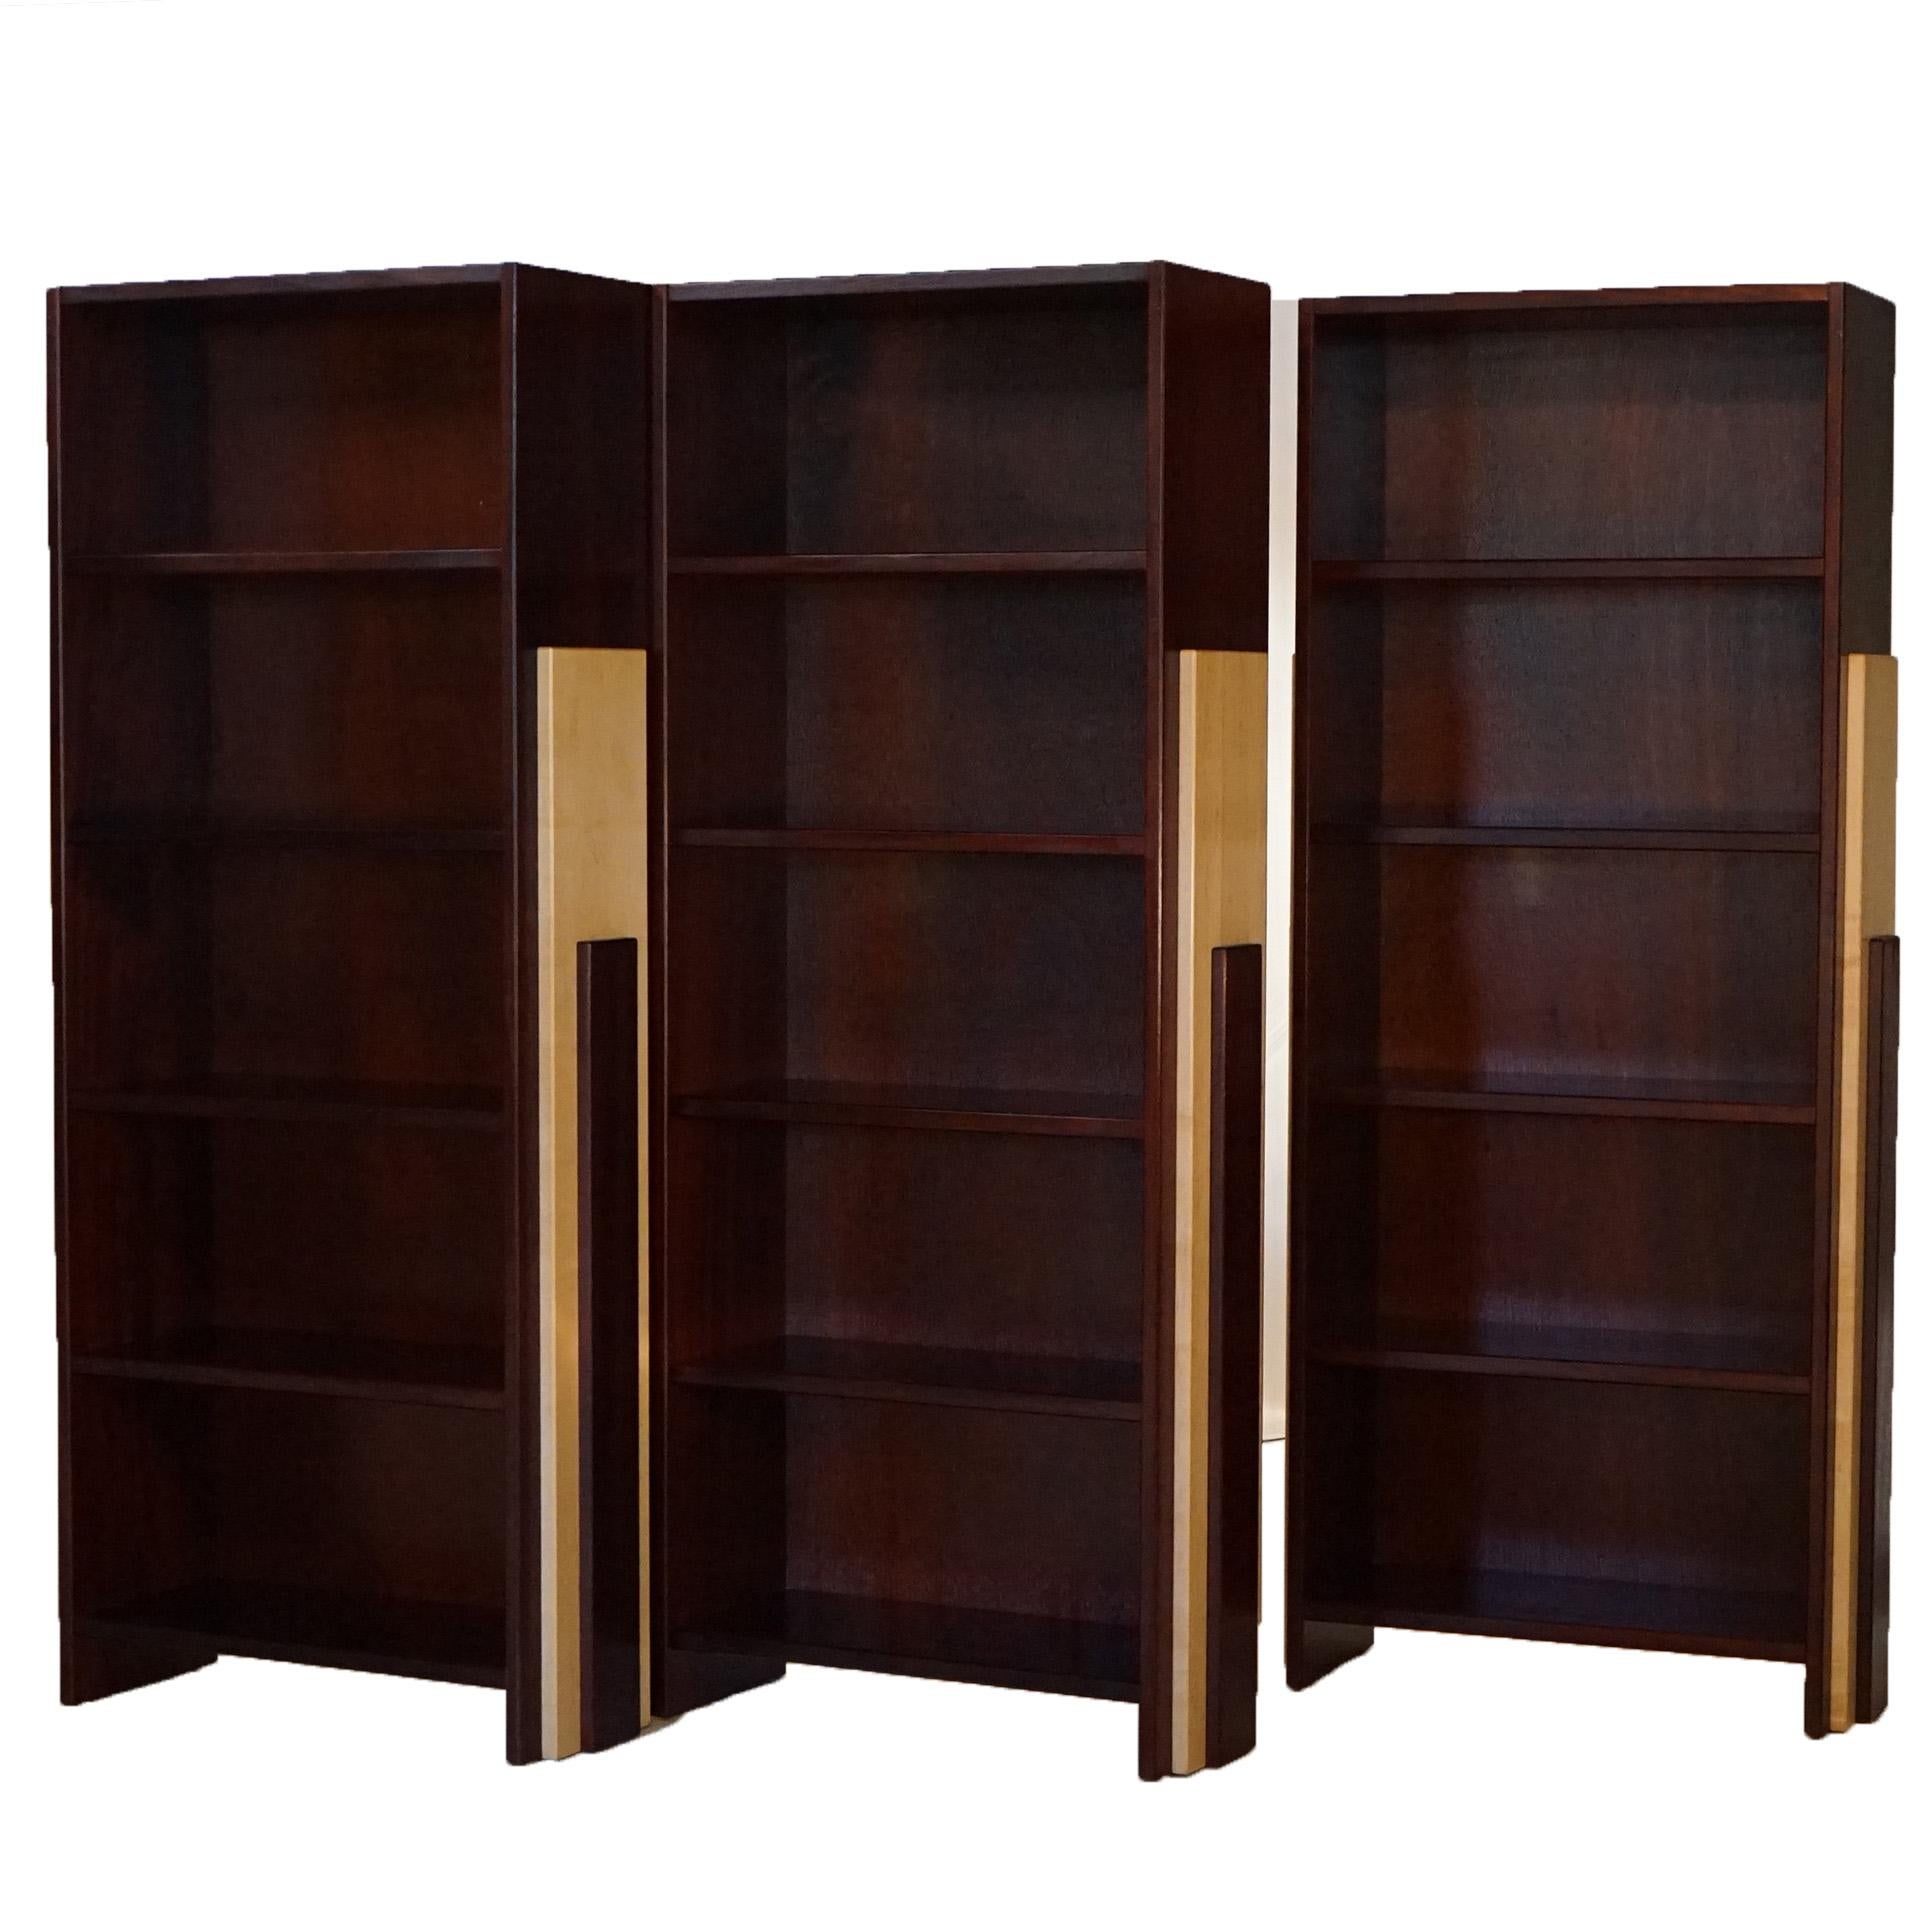 20th Century Mid Century Modern Mahogany & Maple Three-Section Bookcase 20thC For Sale